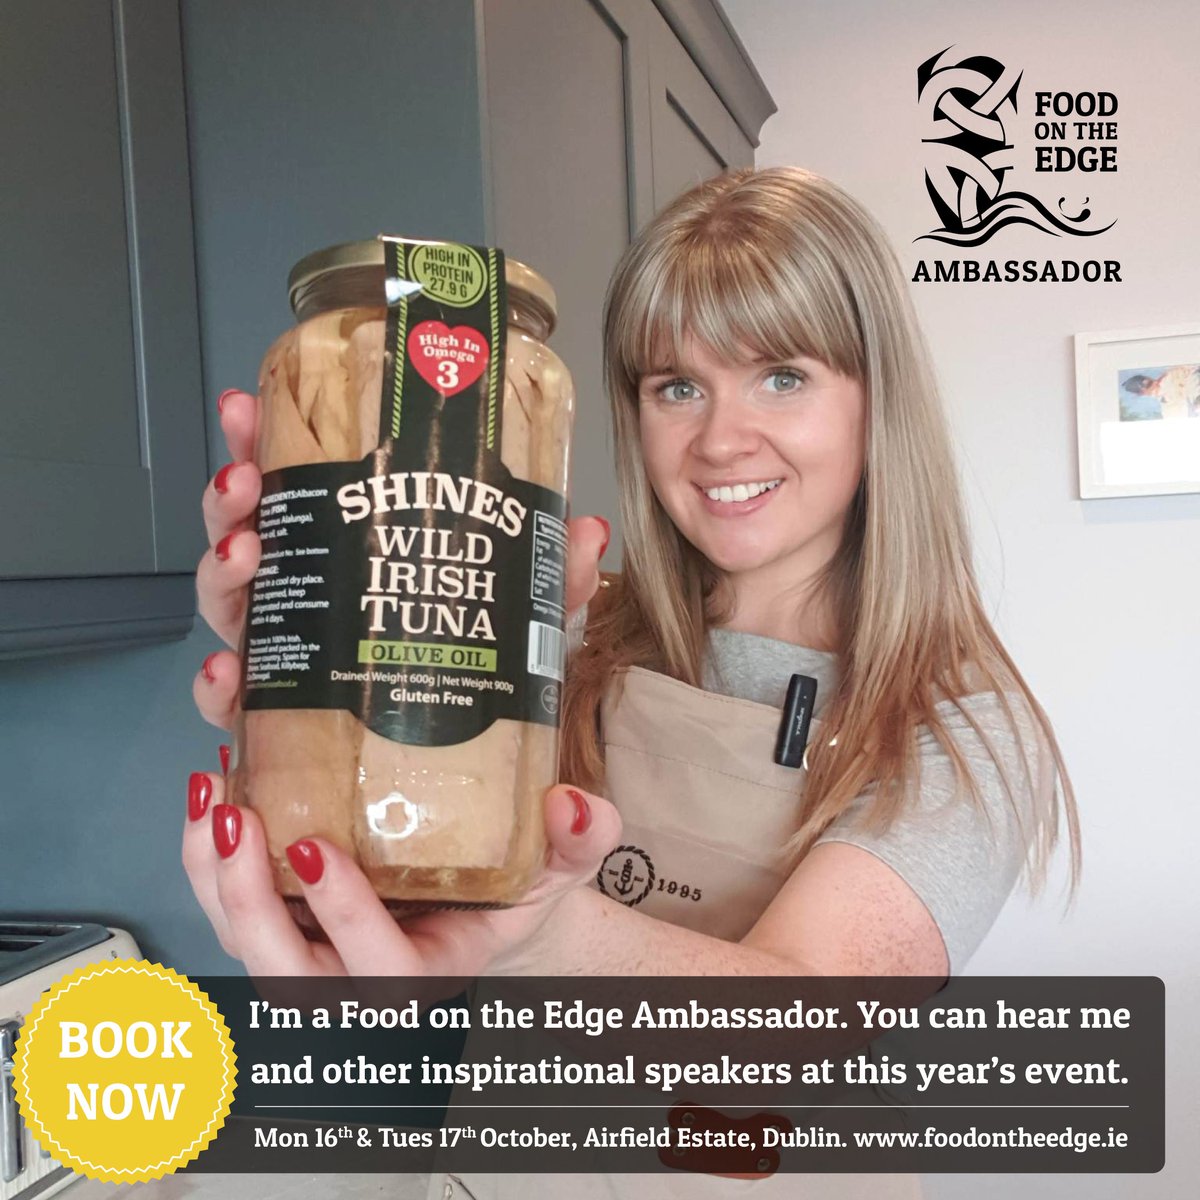 Don't forget! Ciara will be speaking on the Ambassador Panel at 4.15pm on Monday afternoon at this year's Food On The Edge! It takes place at Airfield Estate in Dublin next Monday and Tuesday.
Full details at foodontheedge.ie
#FOTE #FOTE23 #FOTE2023 #FoodOnTheEdge